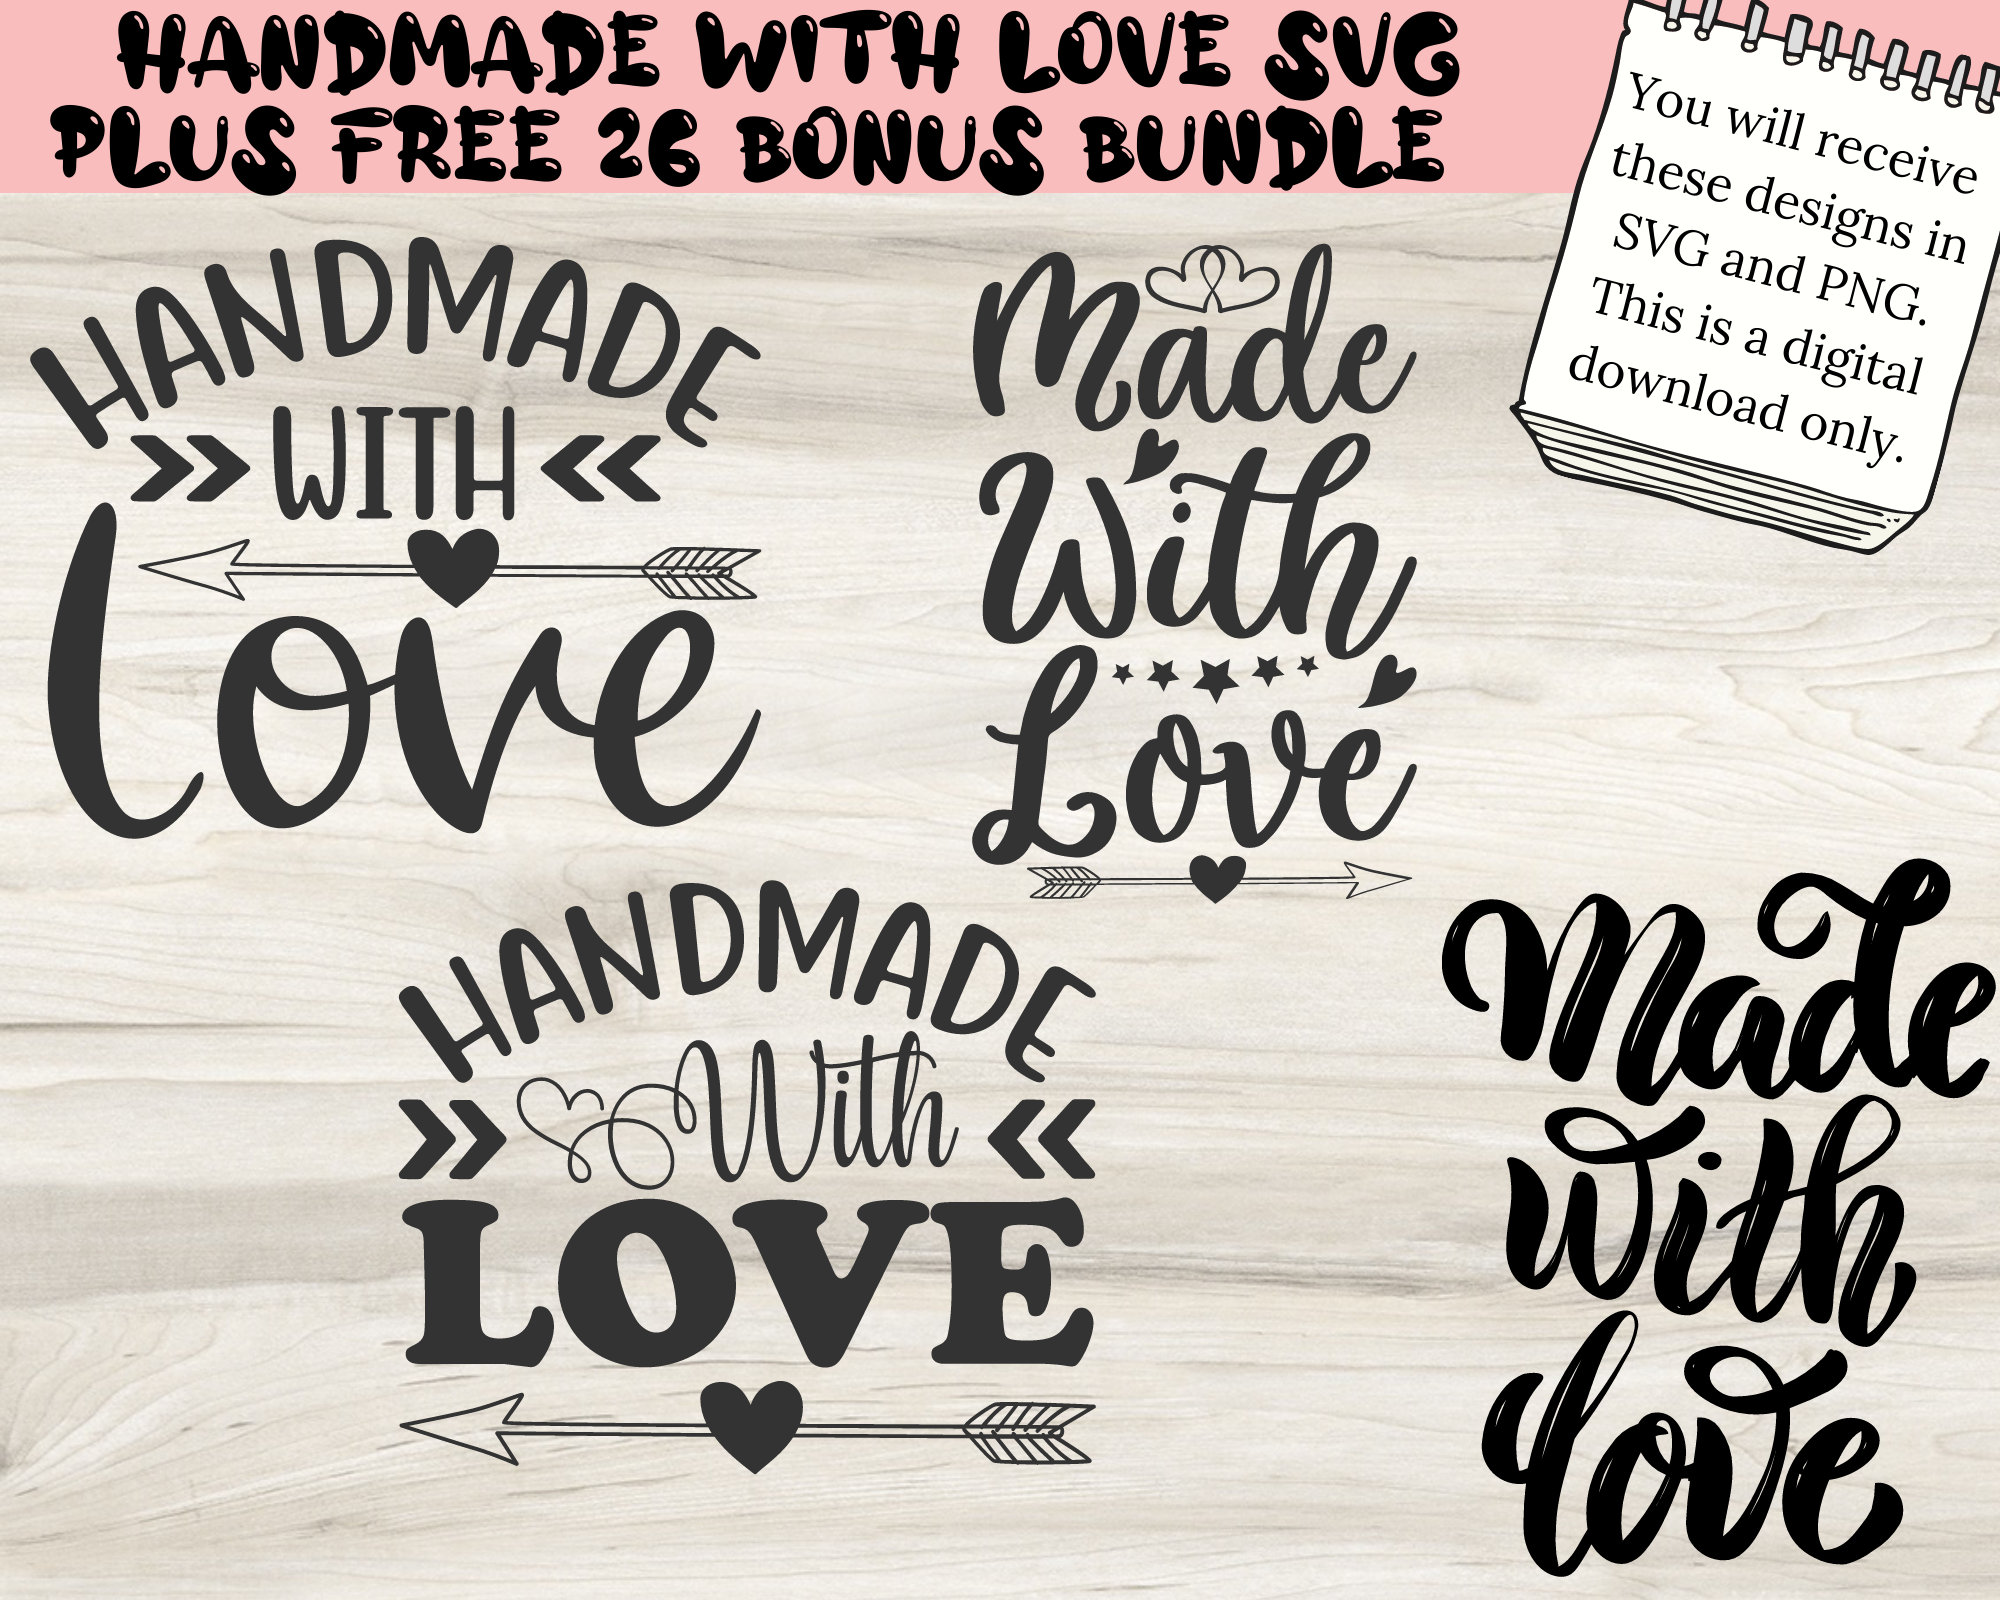 Sewn With Love Tags Printable. Made With Love Product Tags. Gift